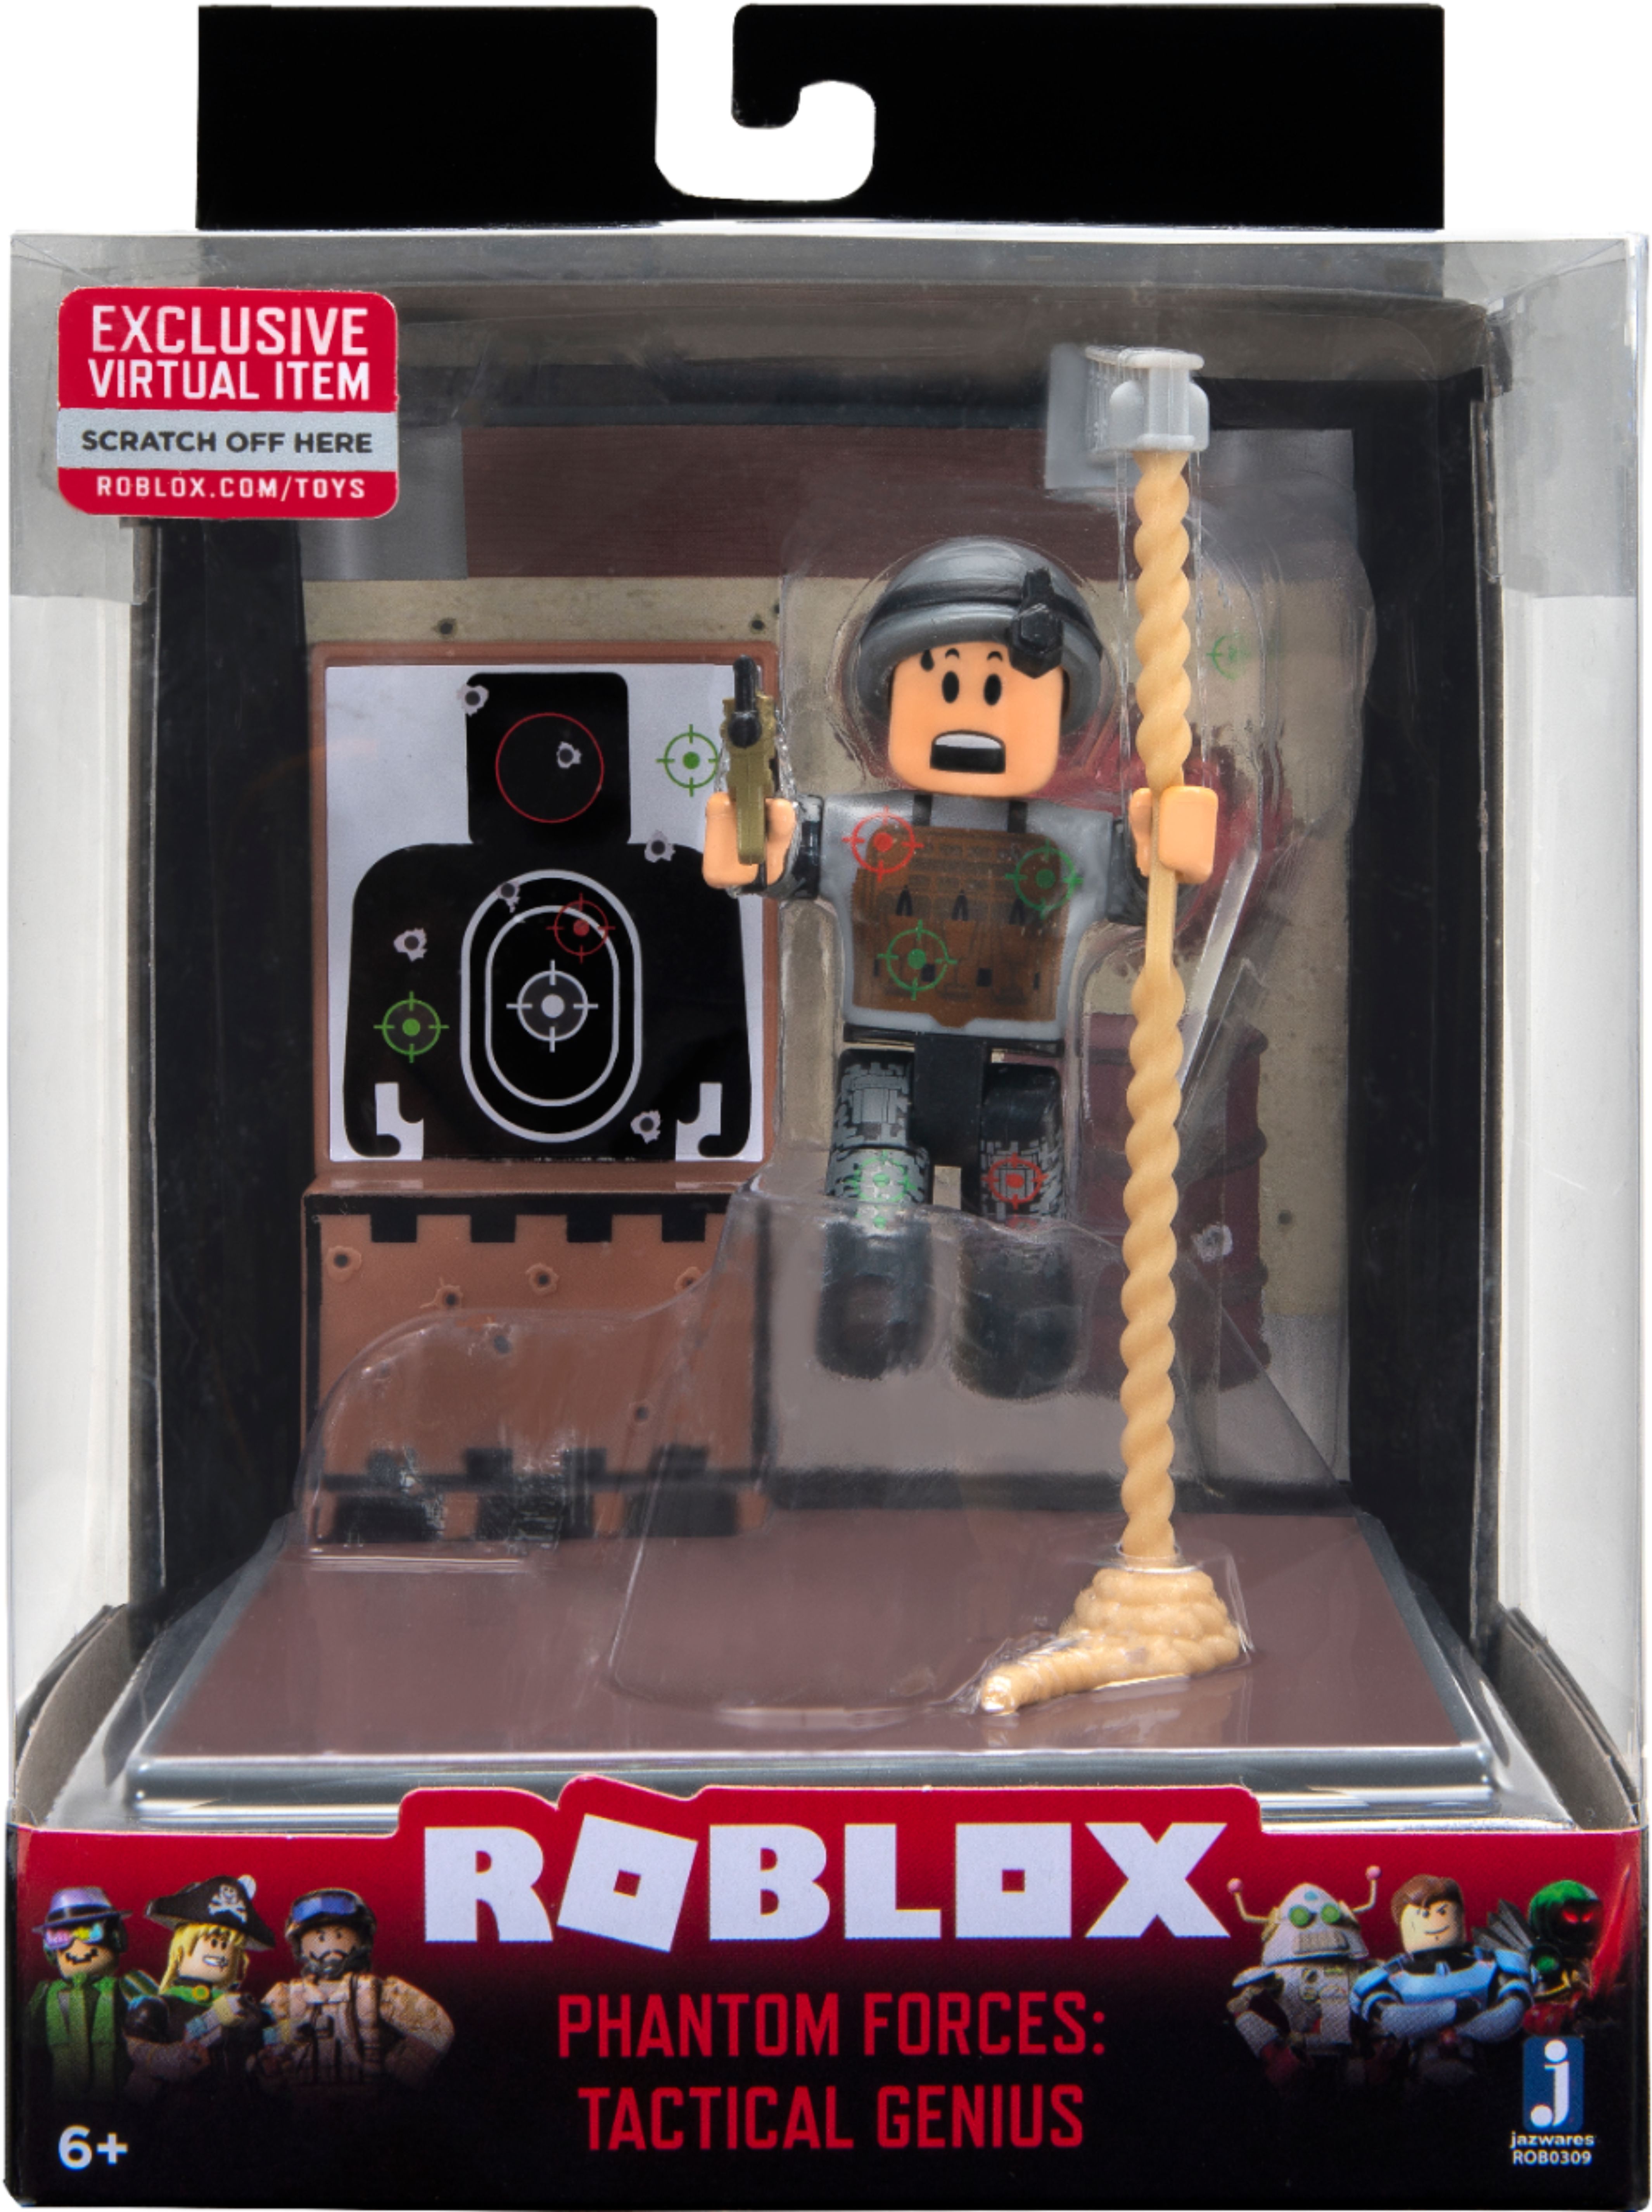 Jazwares Roblox Desktop Series Action Figure Styles May Vary Rob0253 Best Buy - lets make a deal roblox mini figure with virtual game code